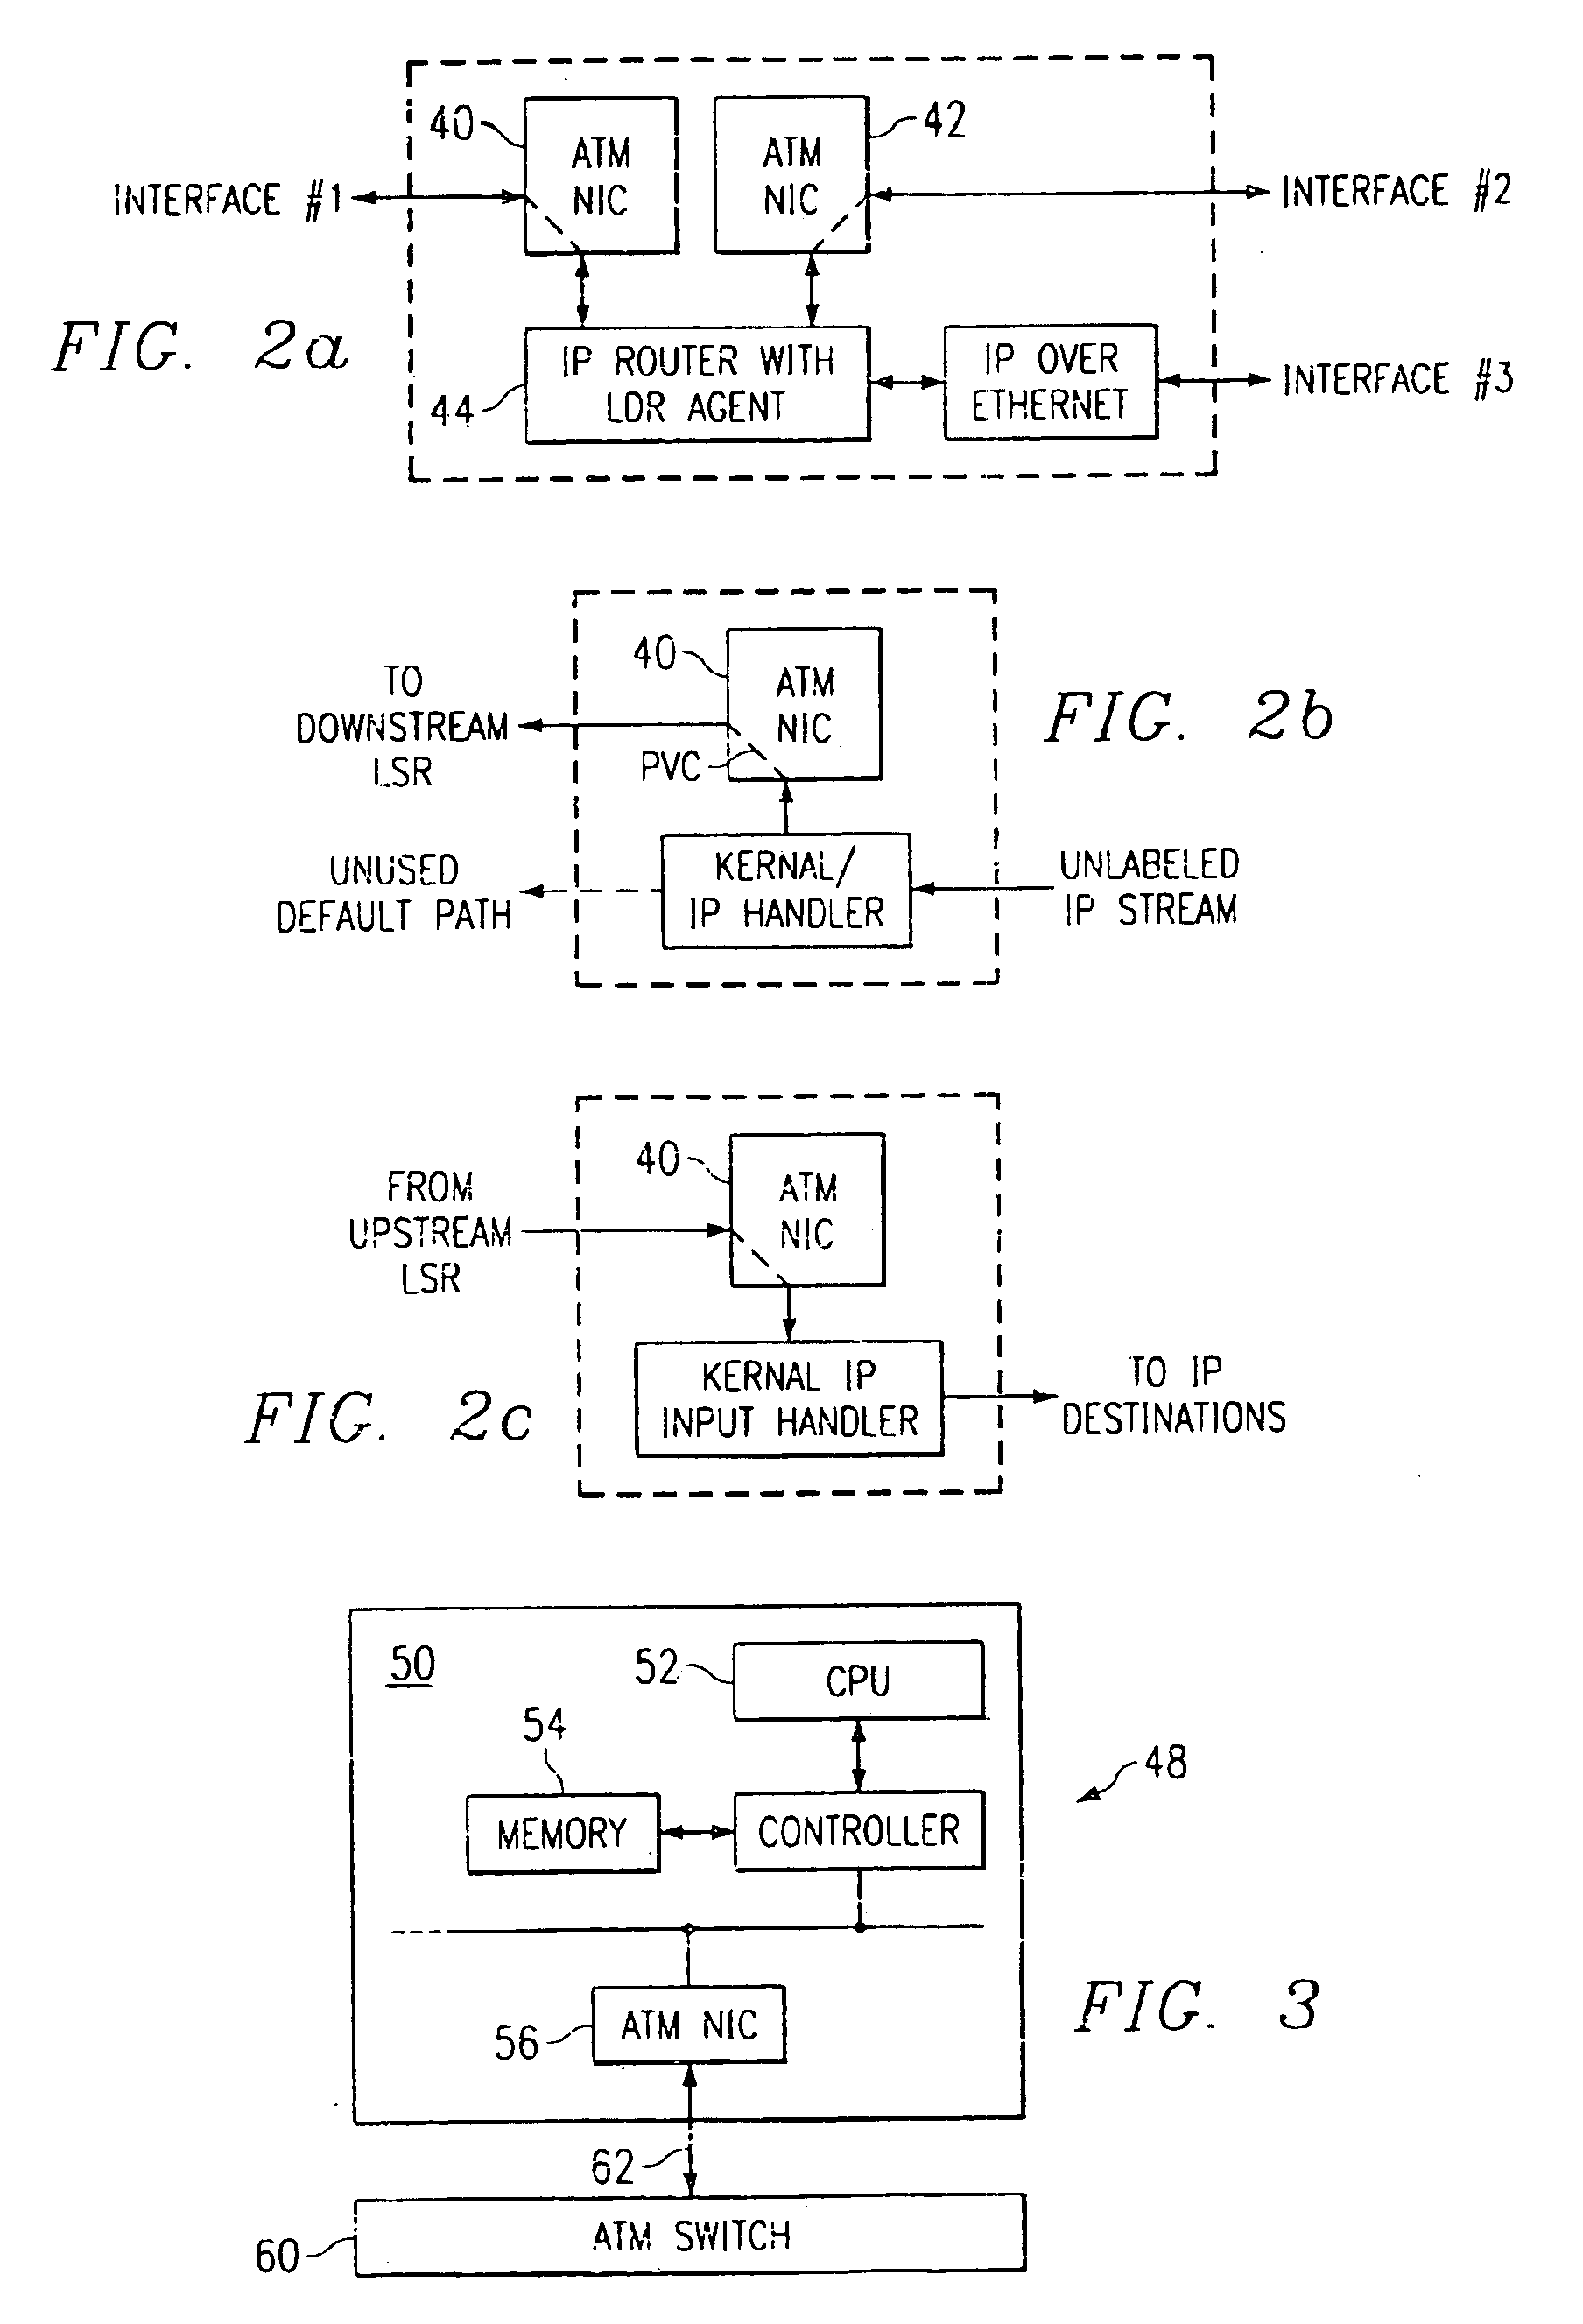 Multiprotocol label switching routers